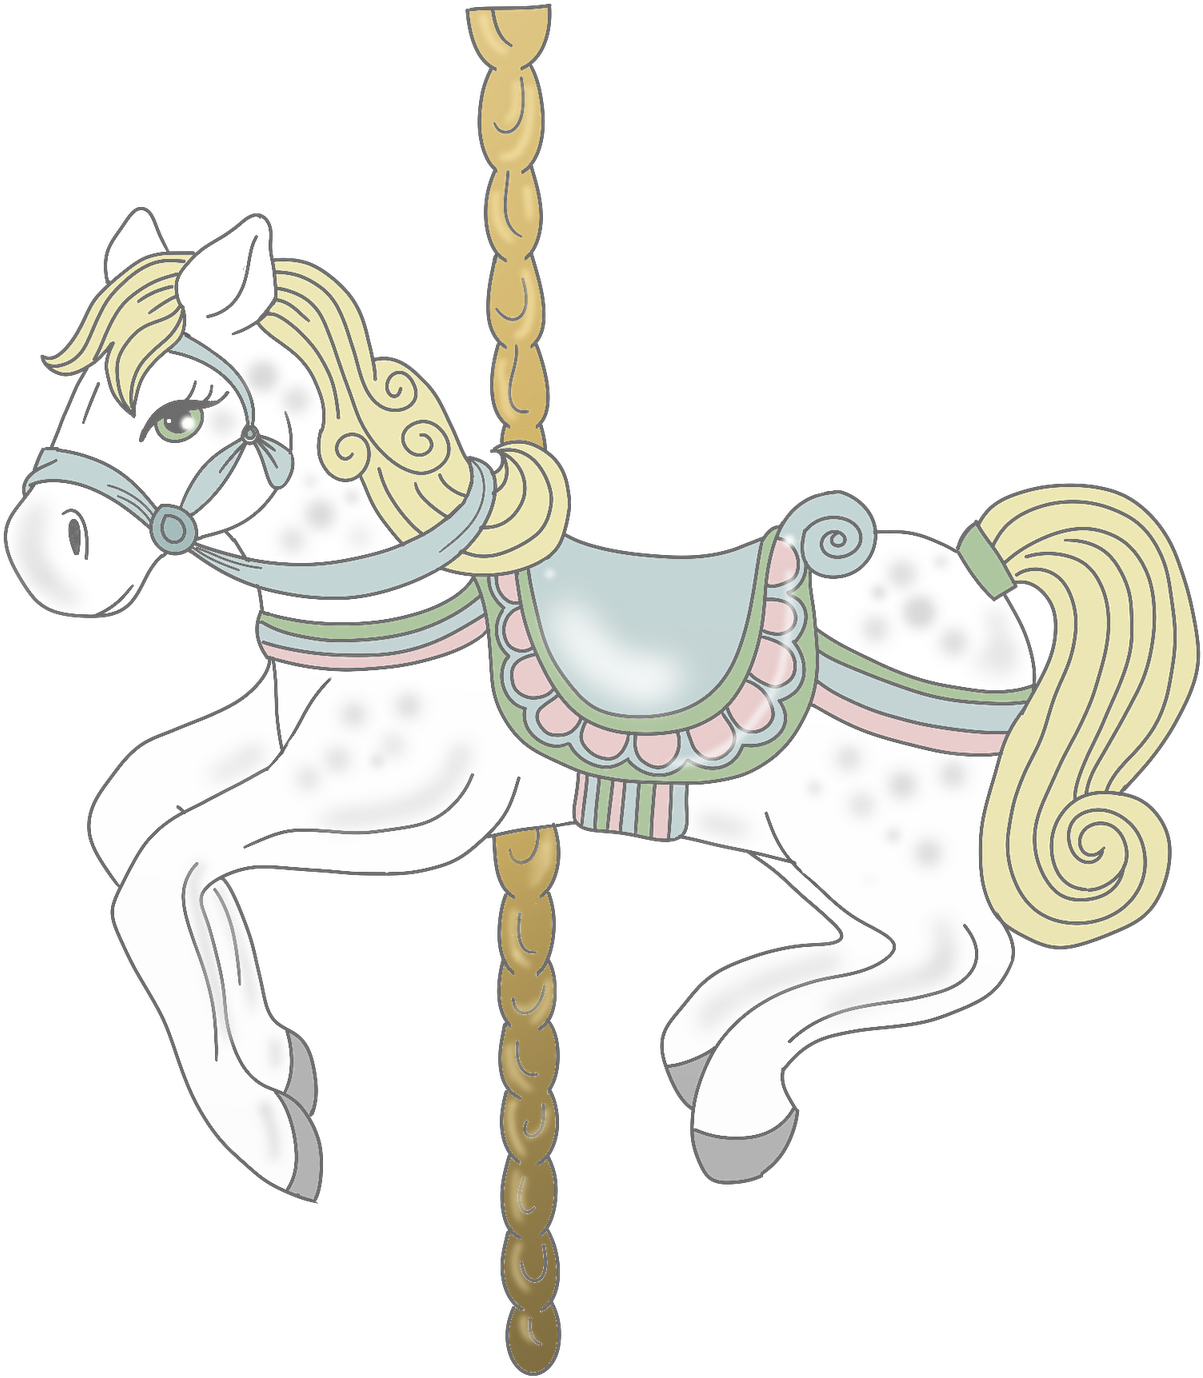 Carousel Horse Illustration.png PNG